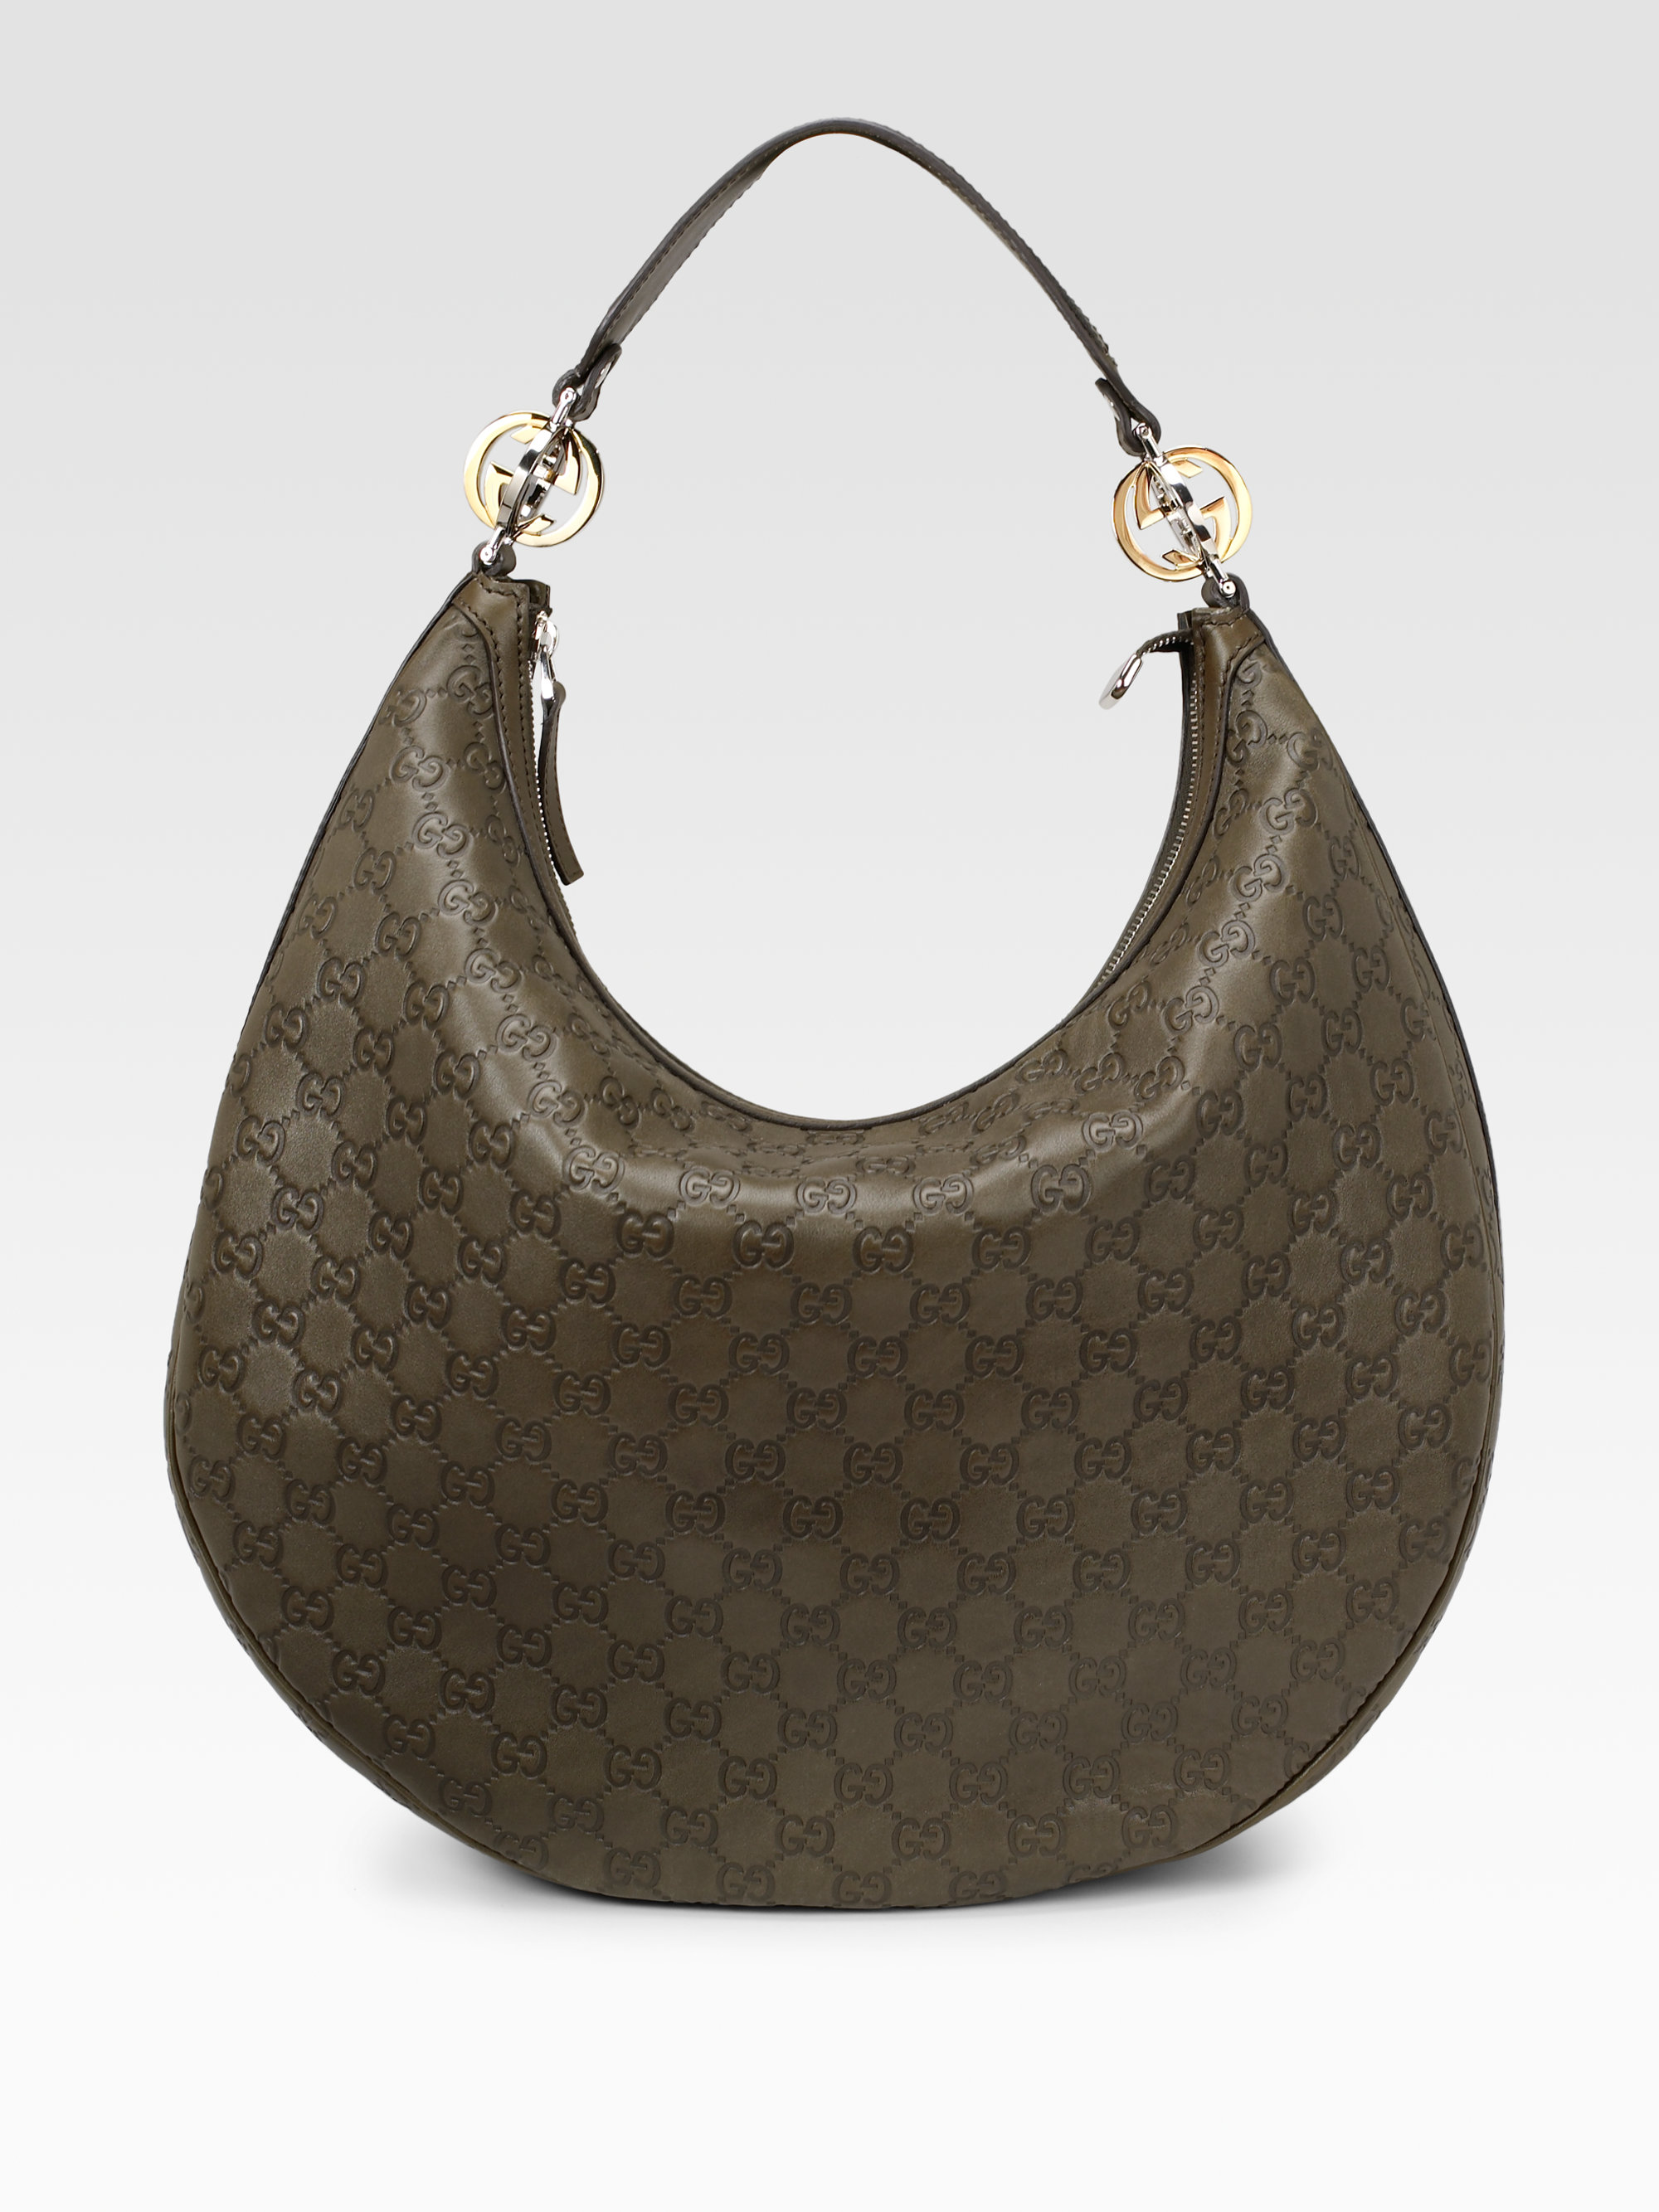 Gucci Gg Twins Large Hobo in Military (Green) - Lyst